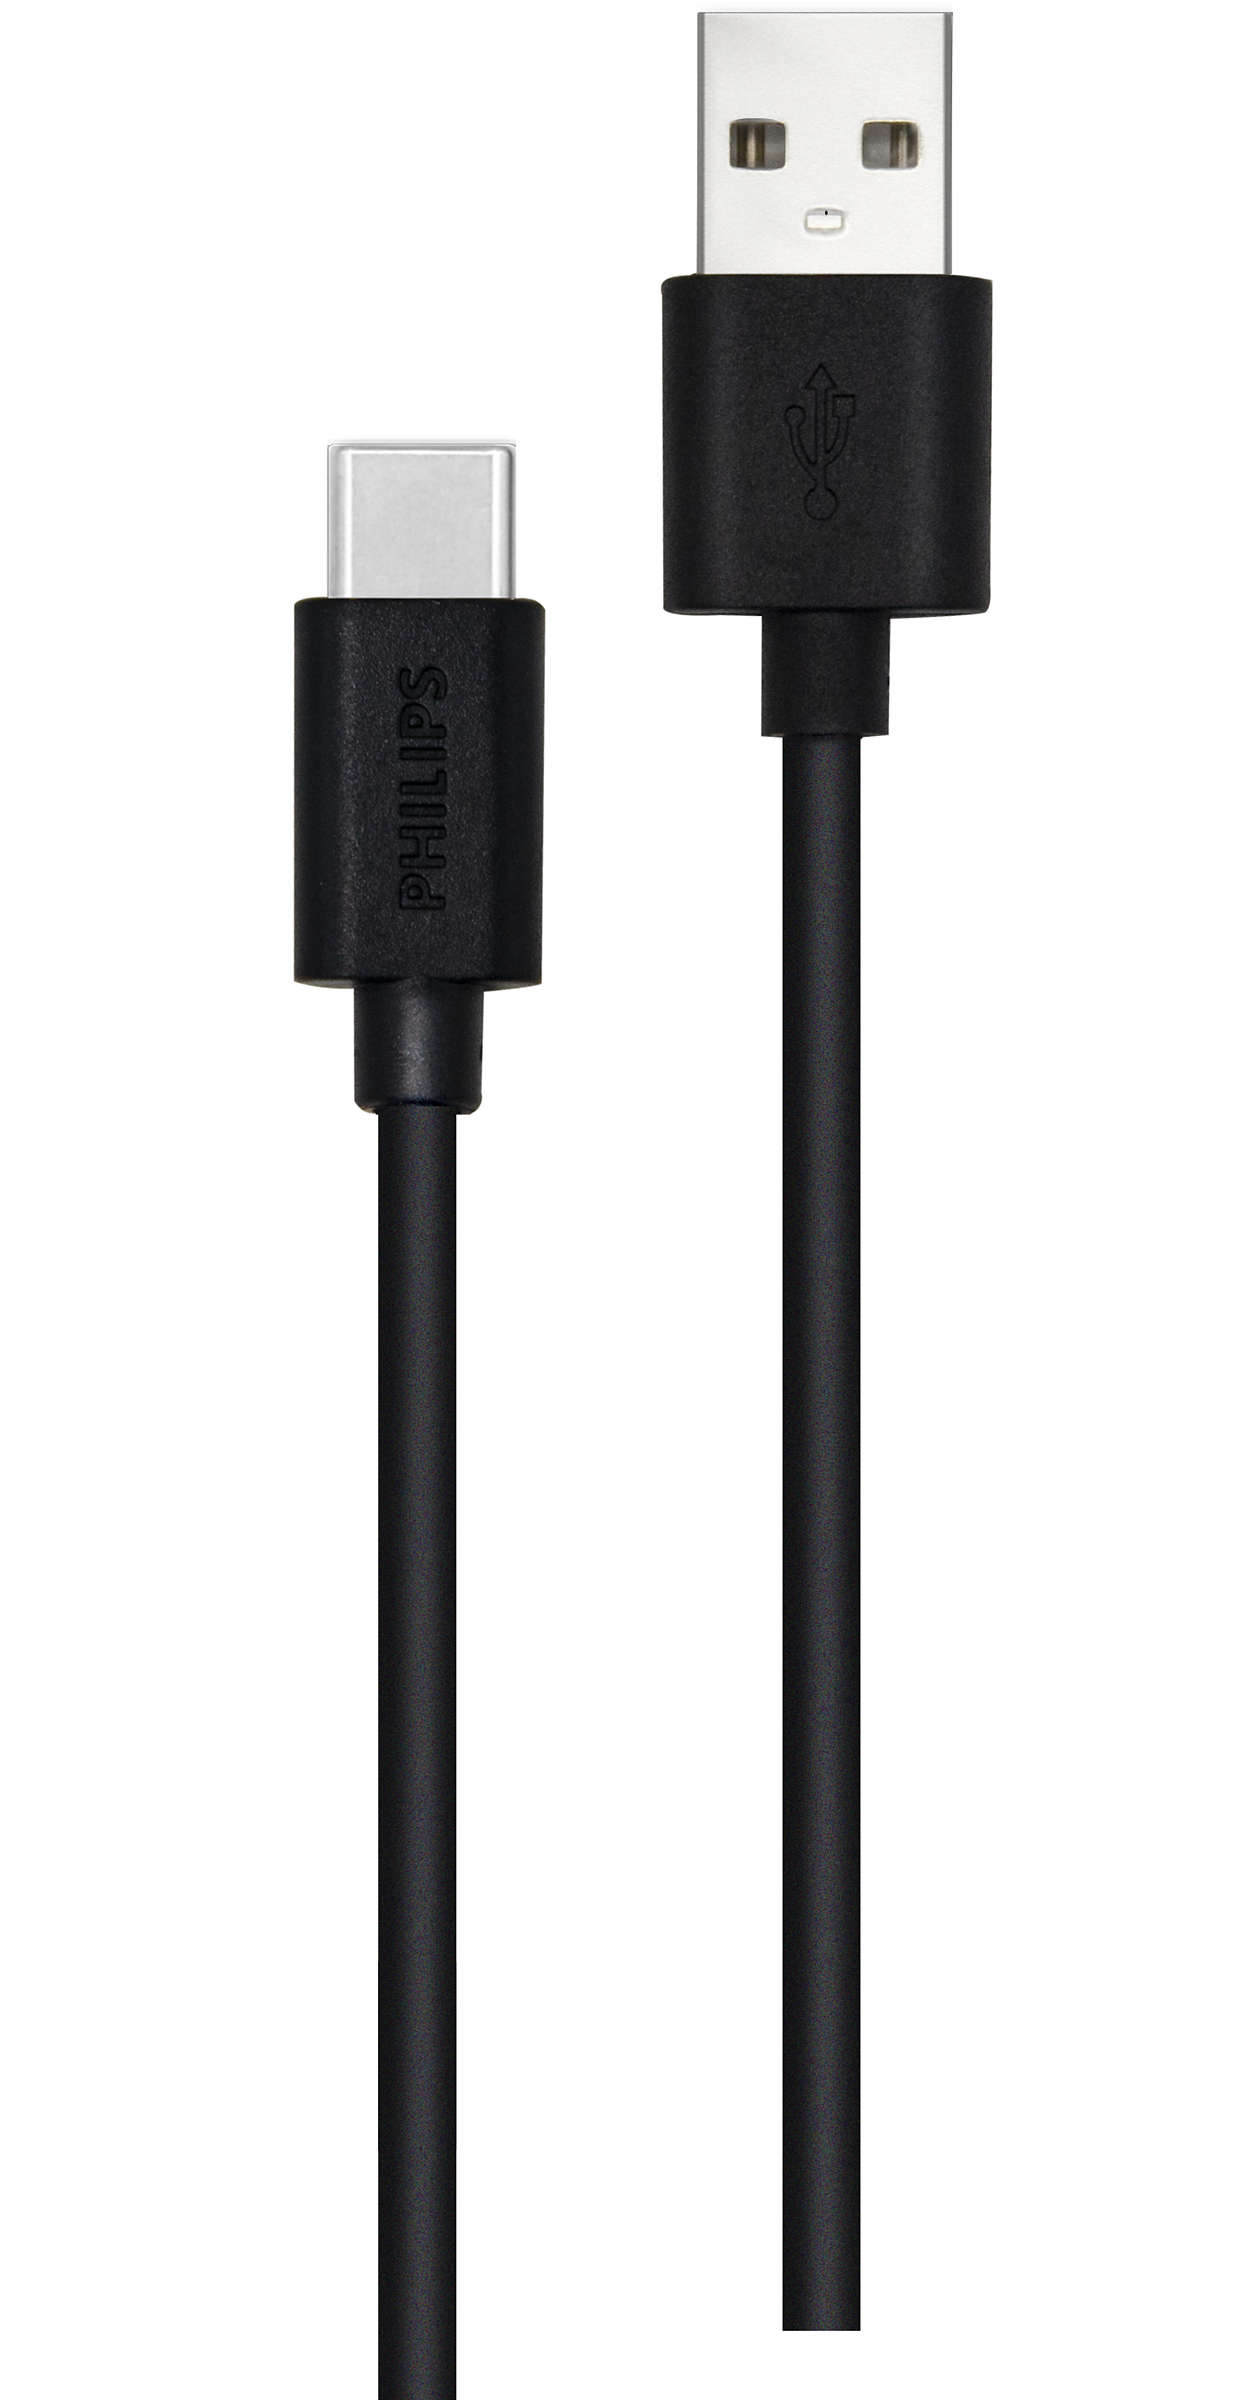 2 m USB-A to USB-C cable